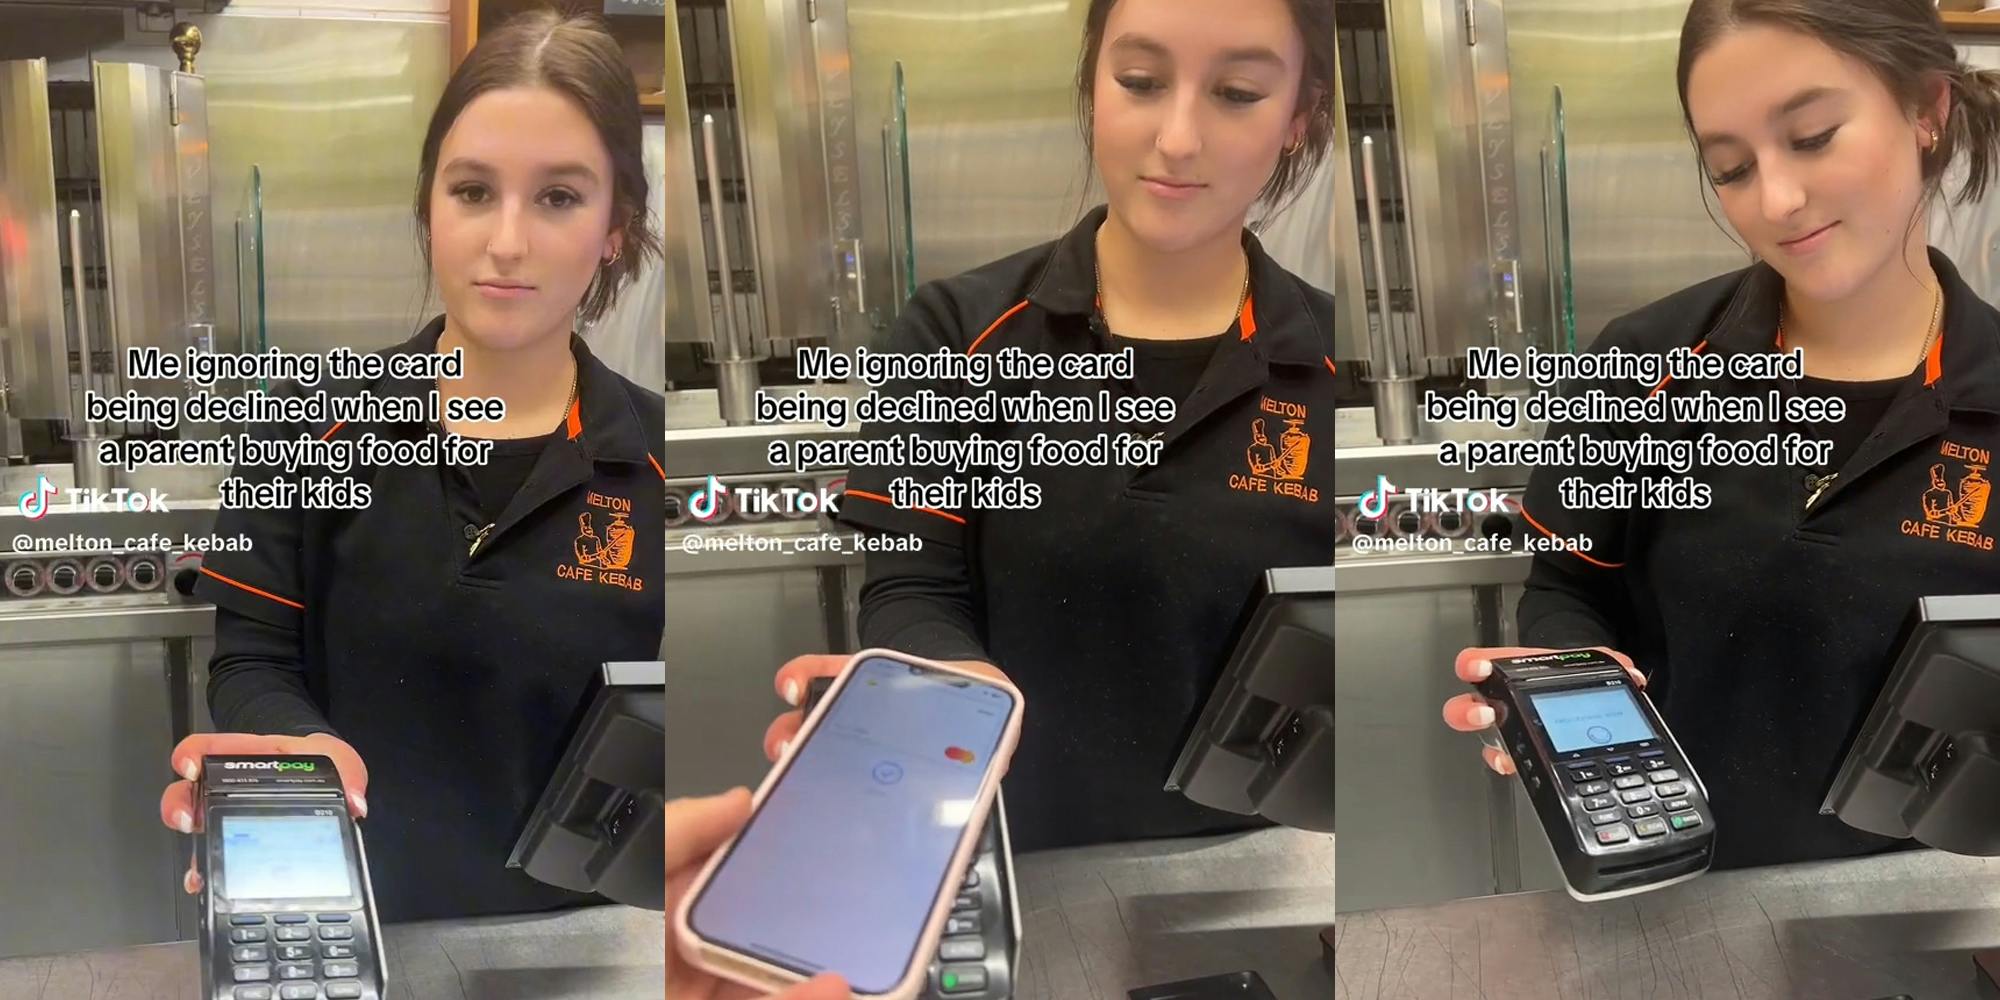 Melton Cafe Kebab employee checking out customer with caption "Me ignoring the card being declined when I see a parent buying food for their kids"